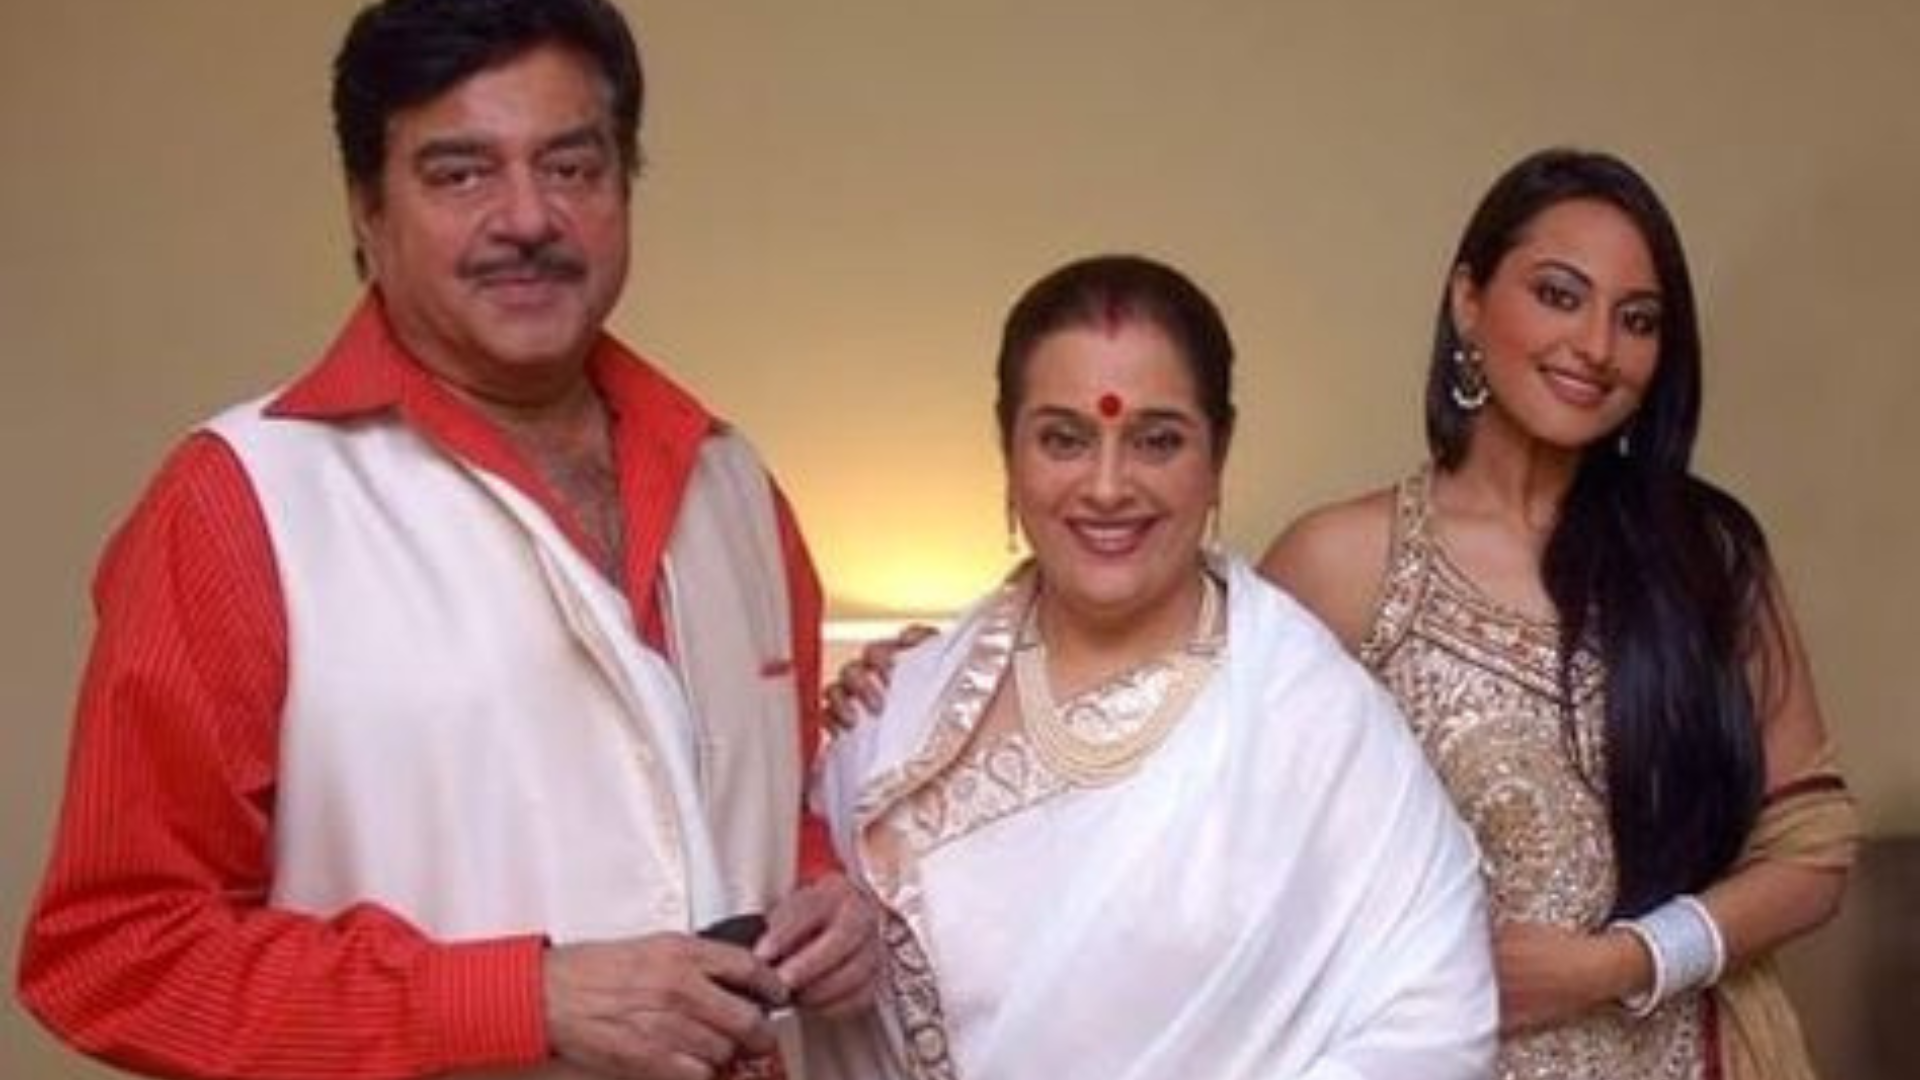 Sonakshi Sinha And Zaheer Iqbal Wedding: Shatrughan Sinha Calls Out The Rumours, ‘I Will Be There’